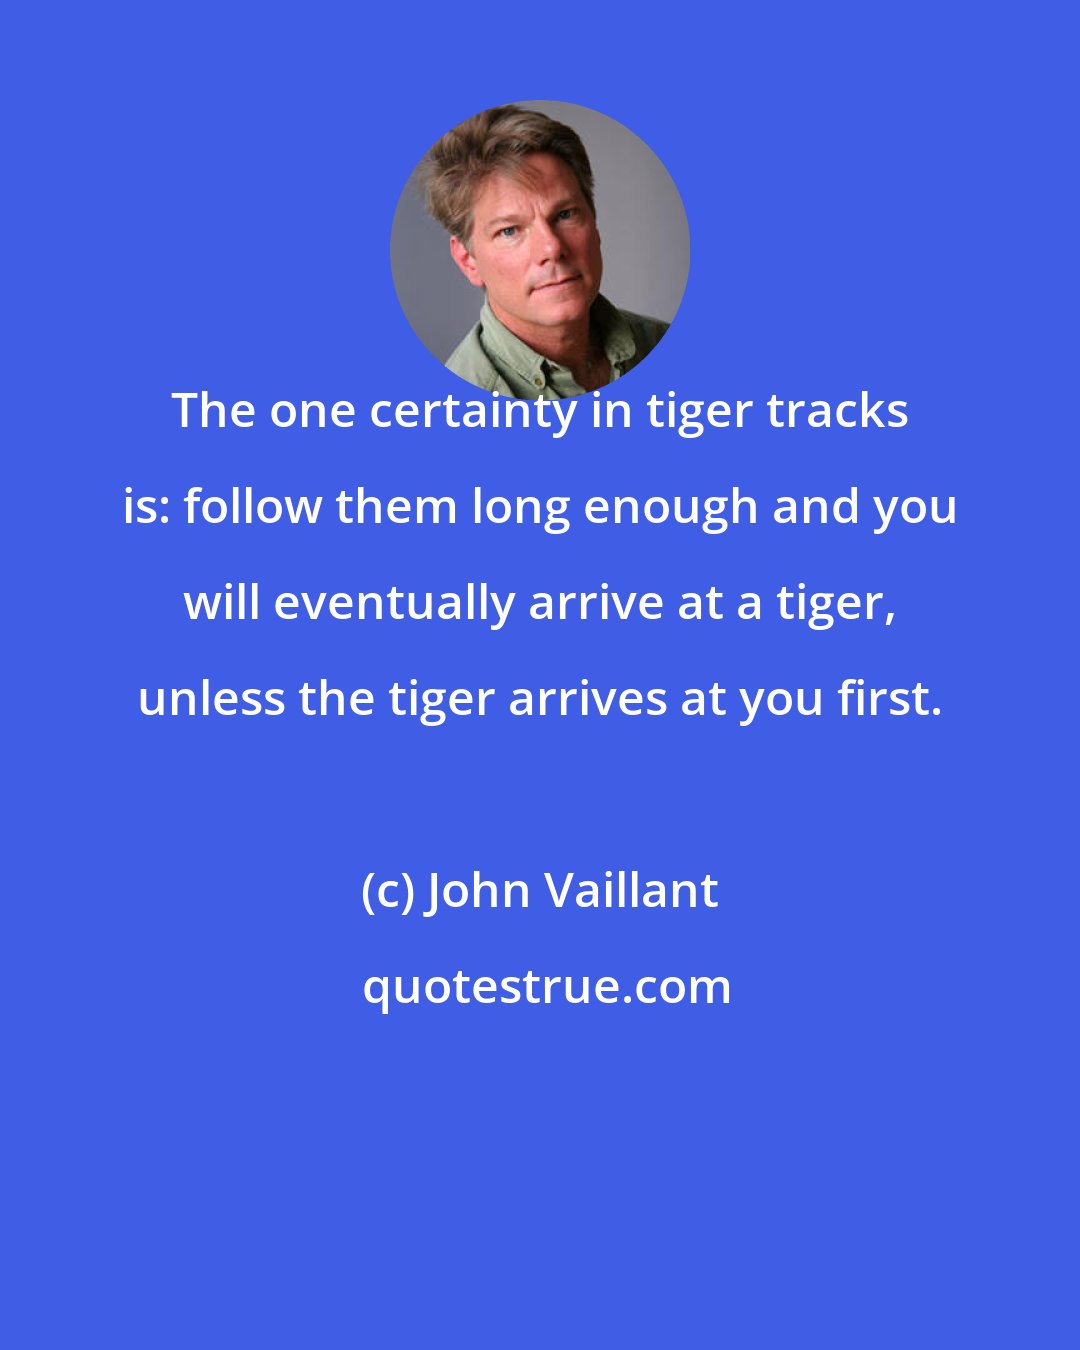 John Vaillant: The one certainty in tiger tracks is: follow them long enough and you will eventually arrive at a tiger, unless the tiger arrives at you first.